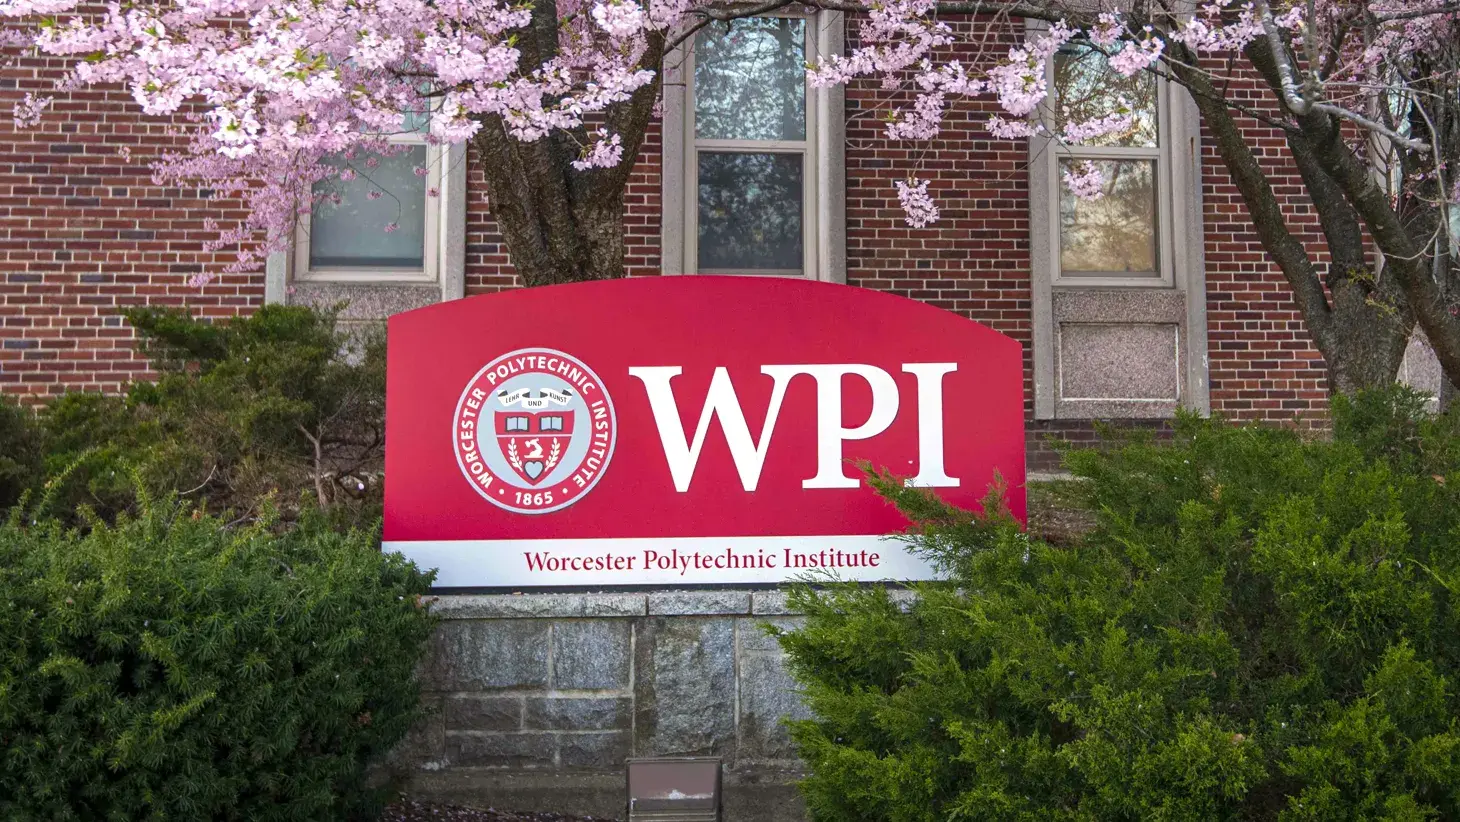 Frontiers at Worcester Polytechnic Institute